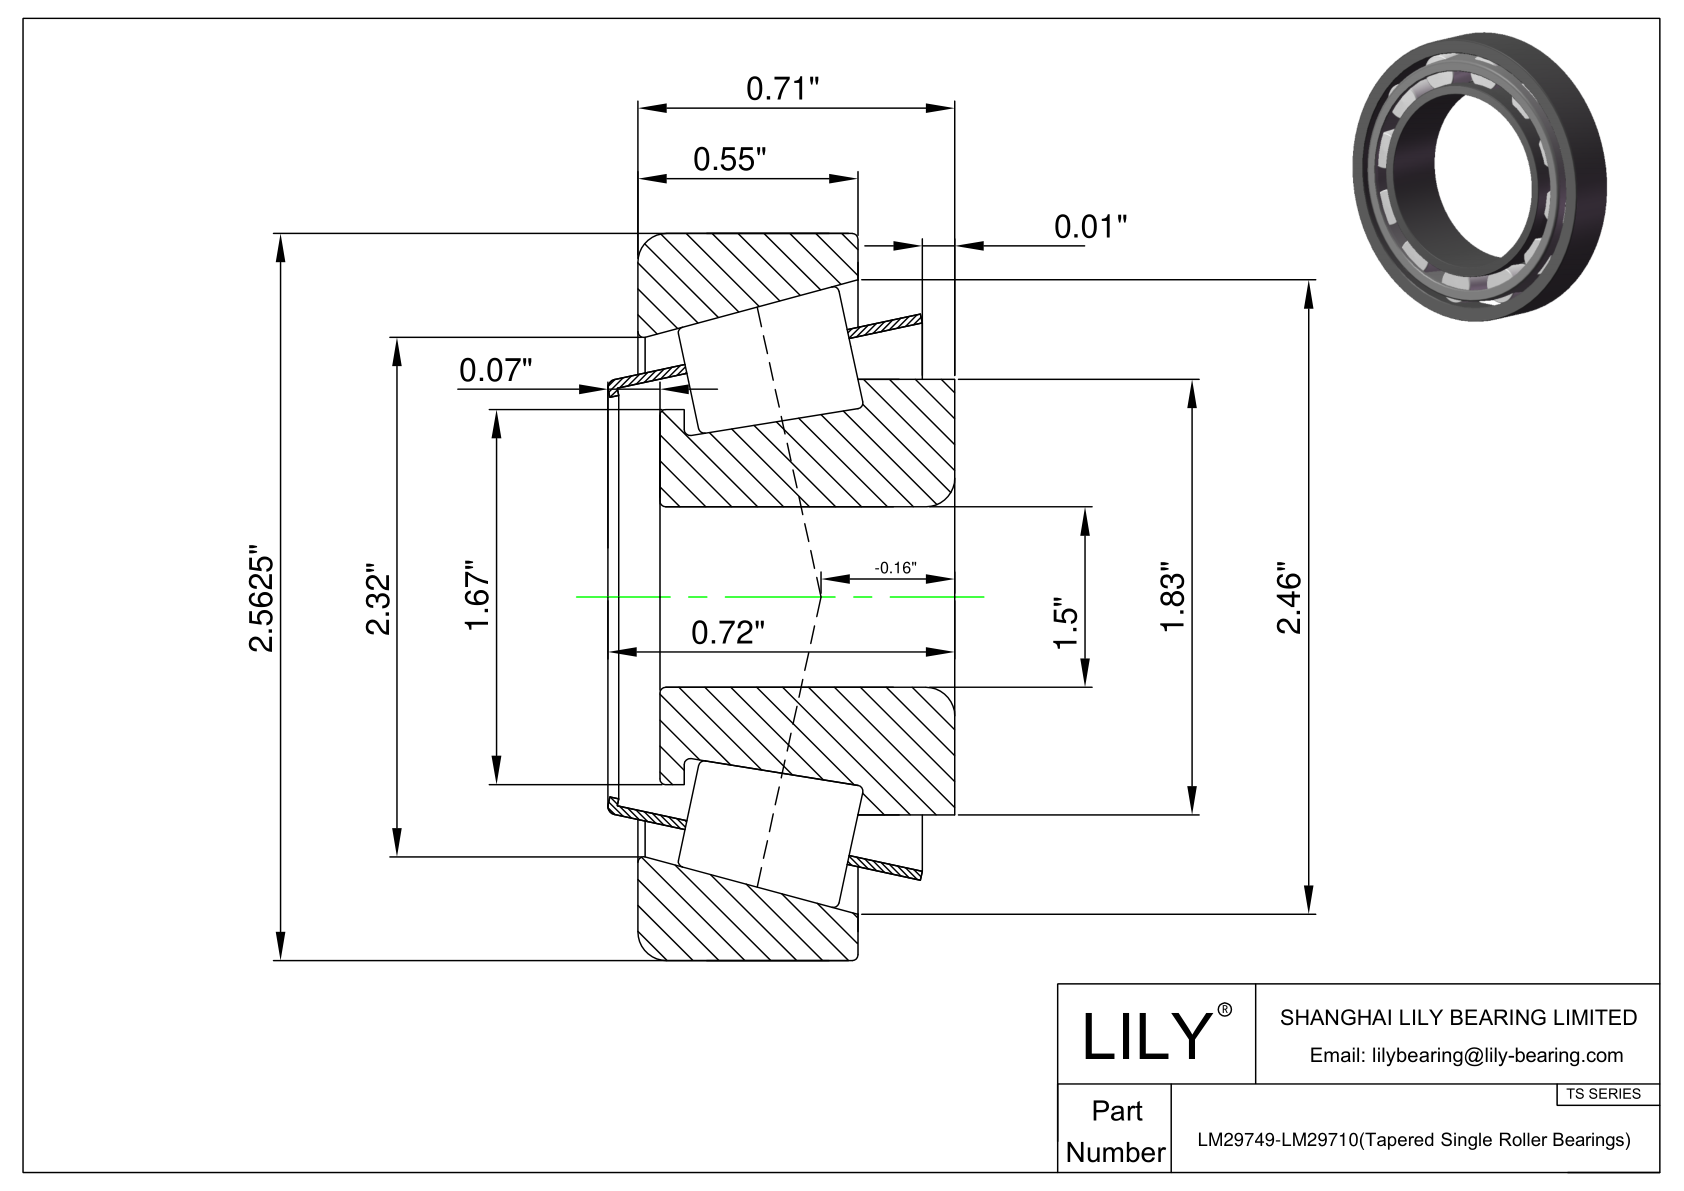 LM29749-LM29710 TS (Tapered Single Roller Bearings) (Imperial) cad drawing